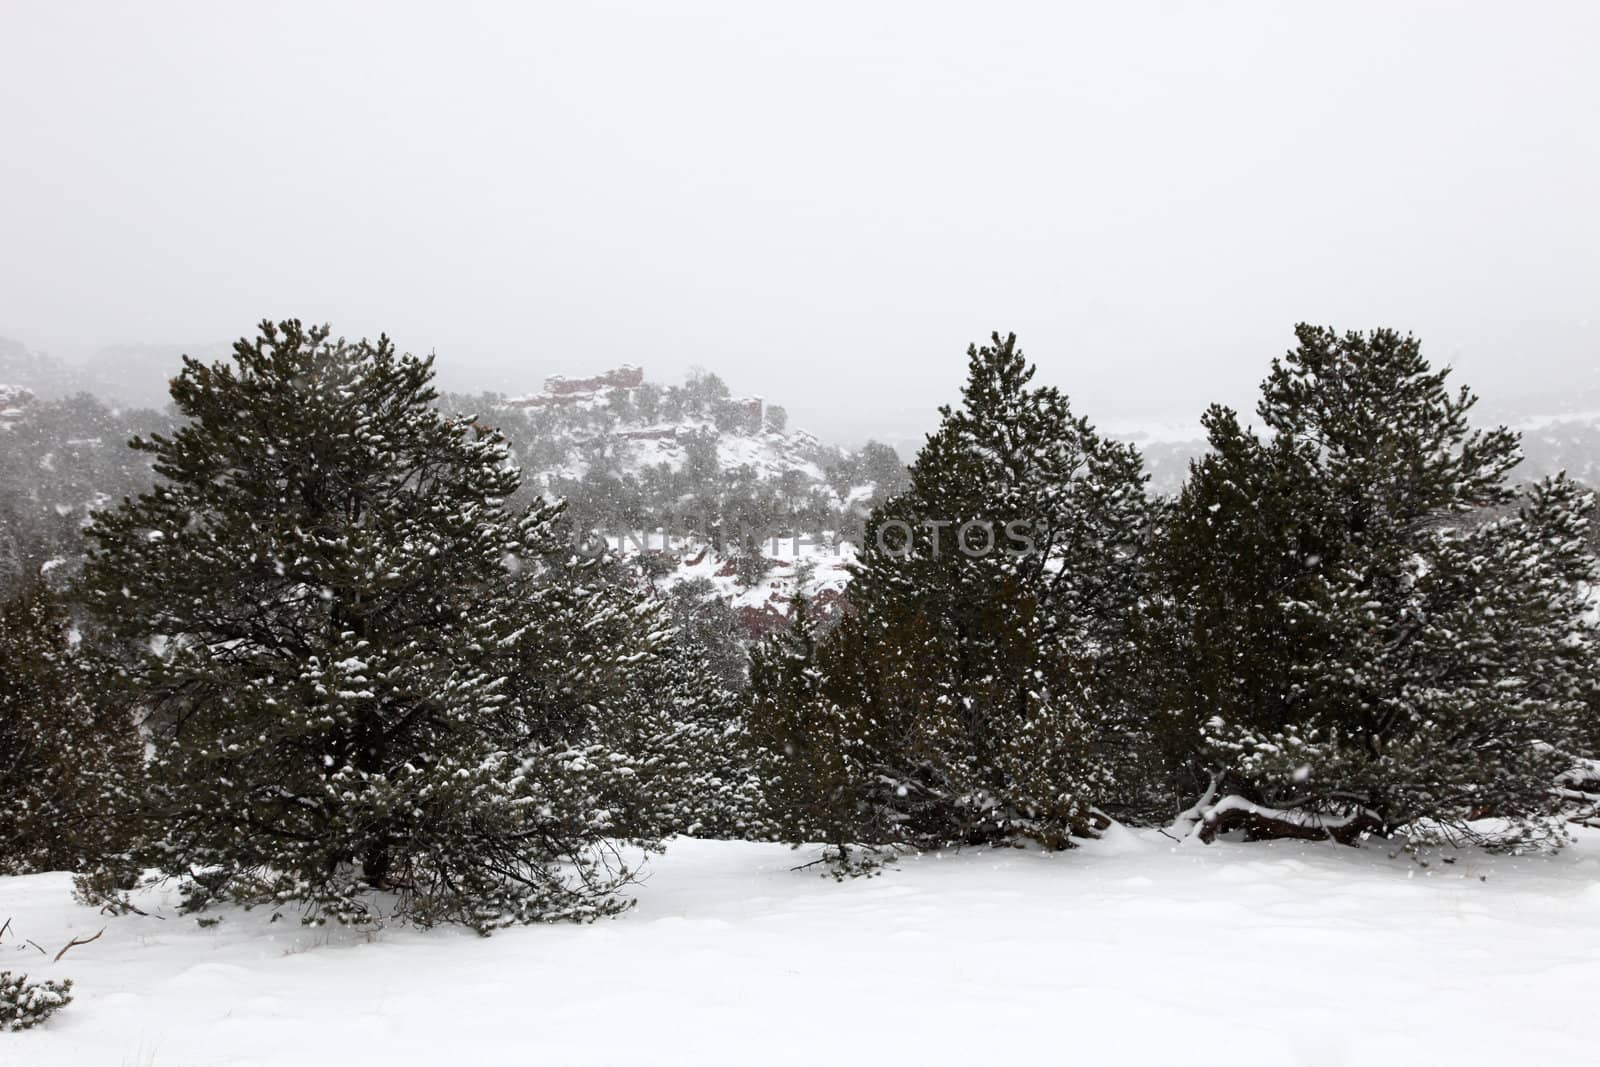 Pinion trees covered with snowflakes during heavy snow in Colorado high country